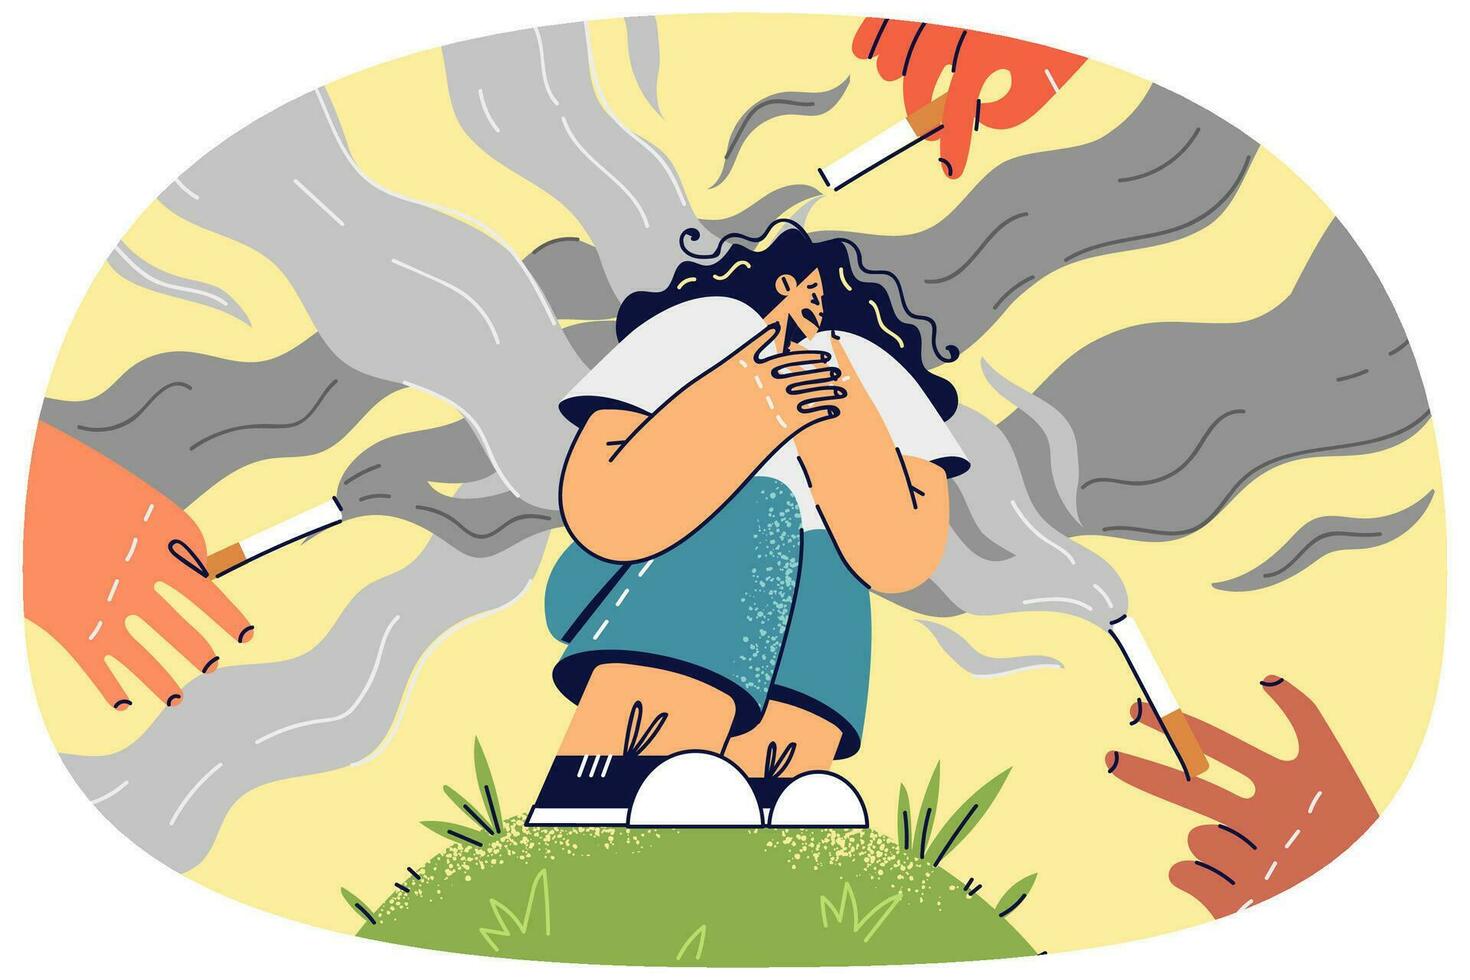 Unhappy girl suffer from people smoking near. Upset woman struggle with health problems with people with cigarettes near. Passive smoker. Vector illustration.